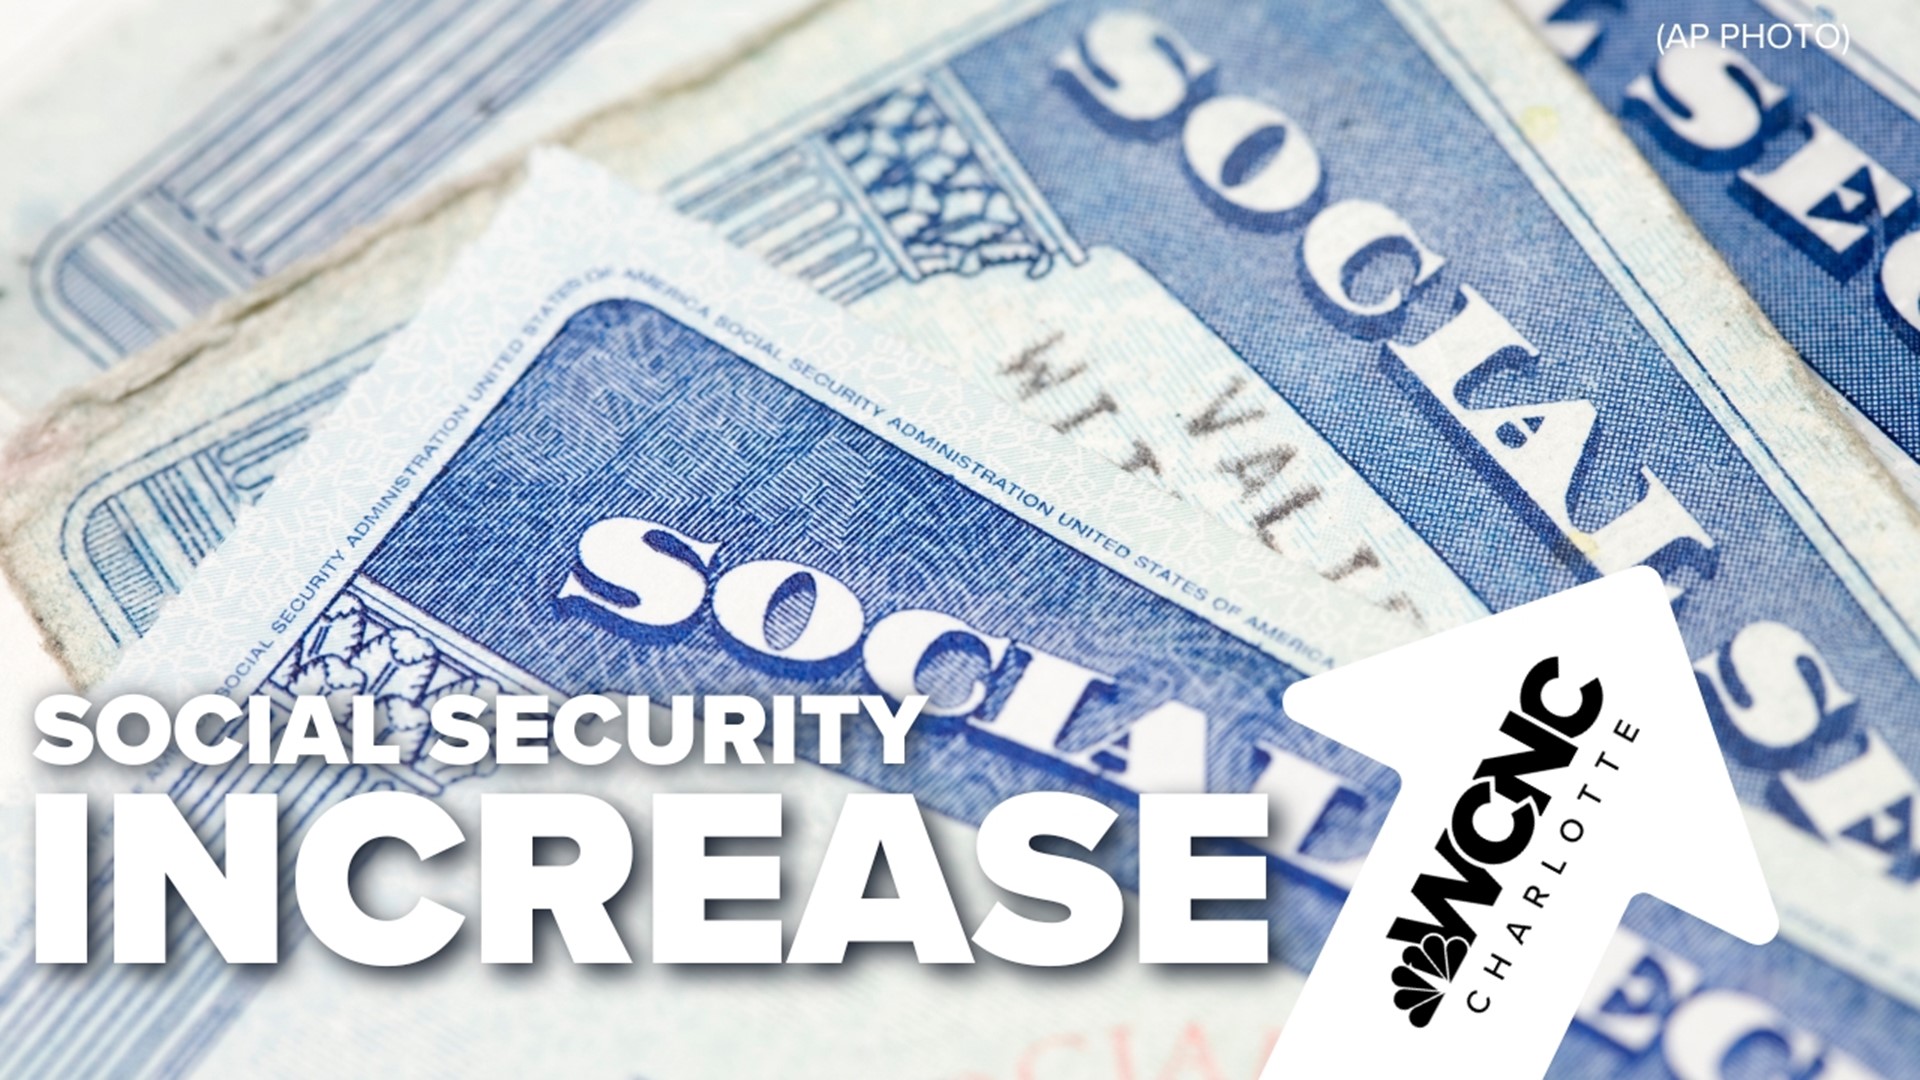 If you receive Social Security benefits, your payments will be bigger starting next year.